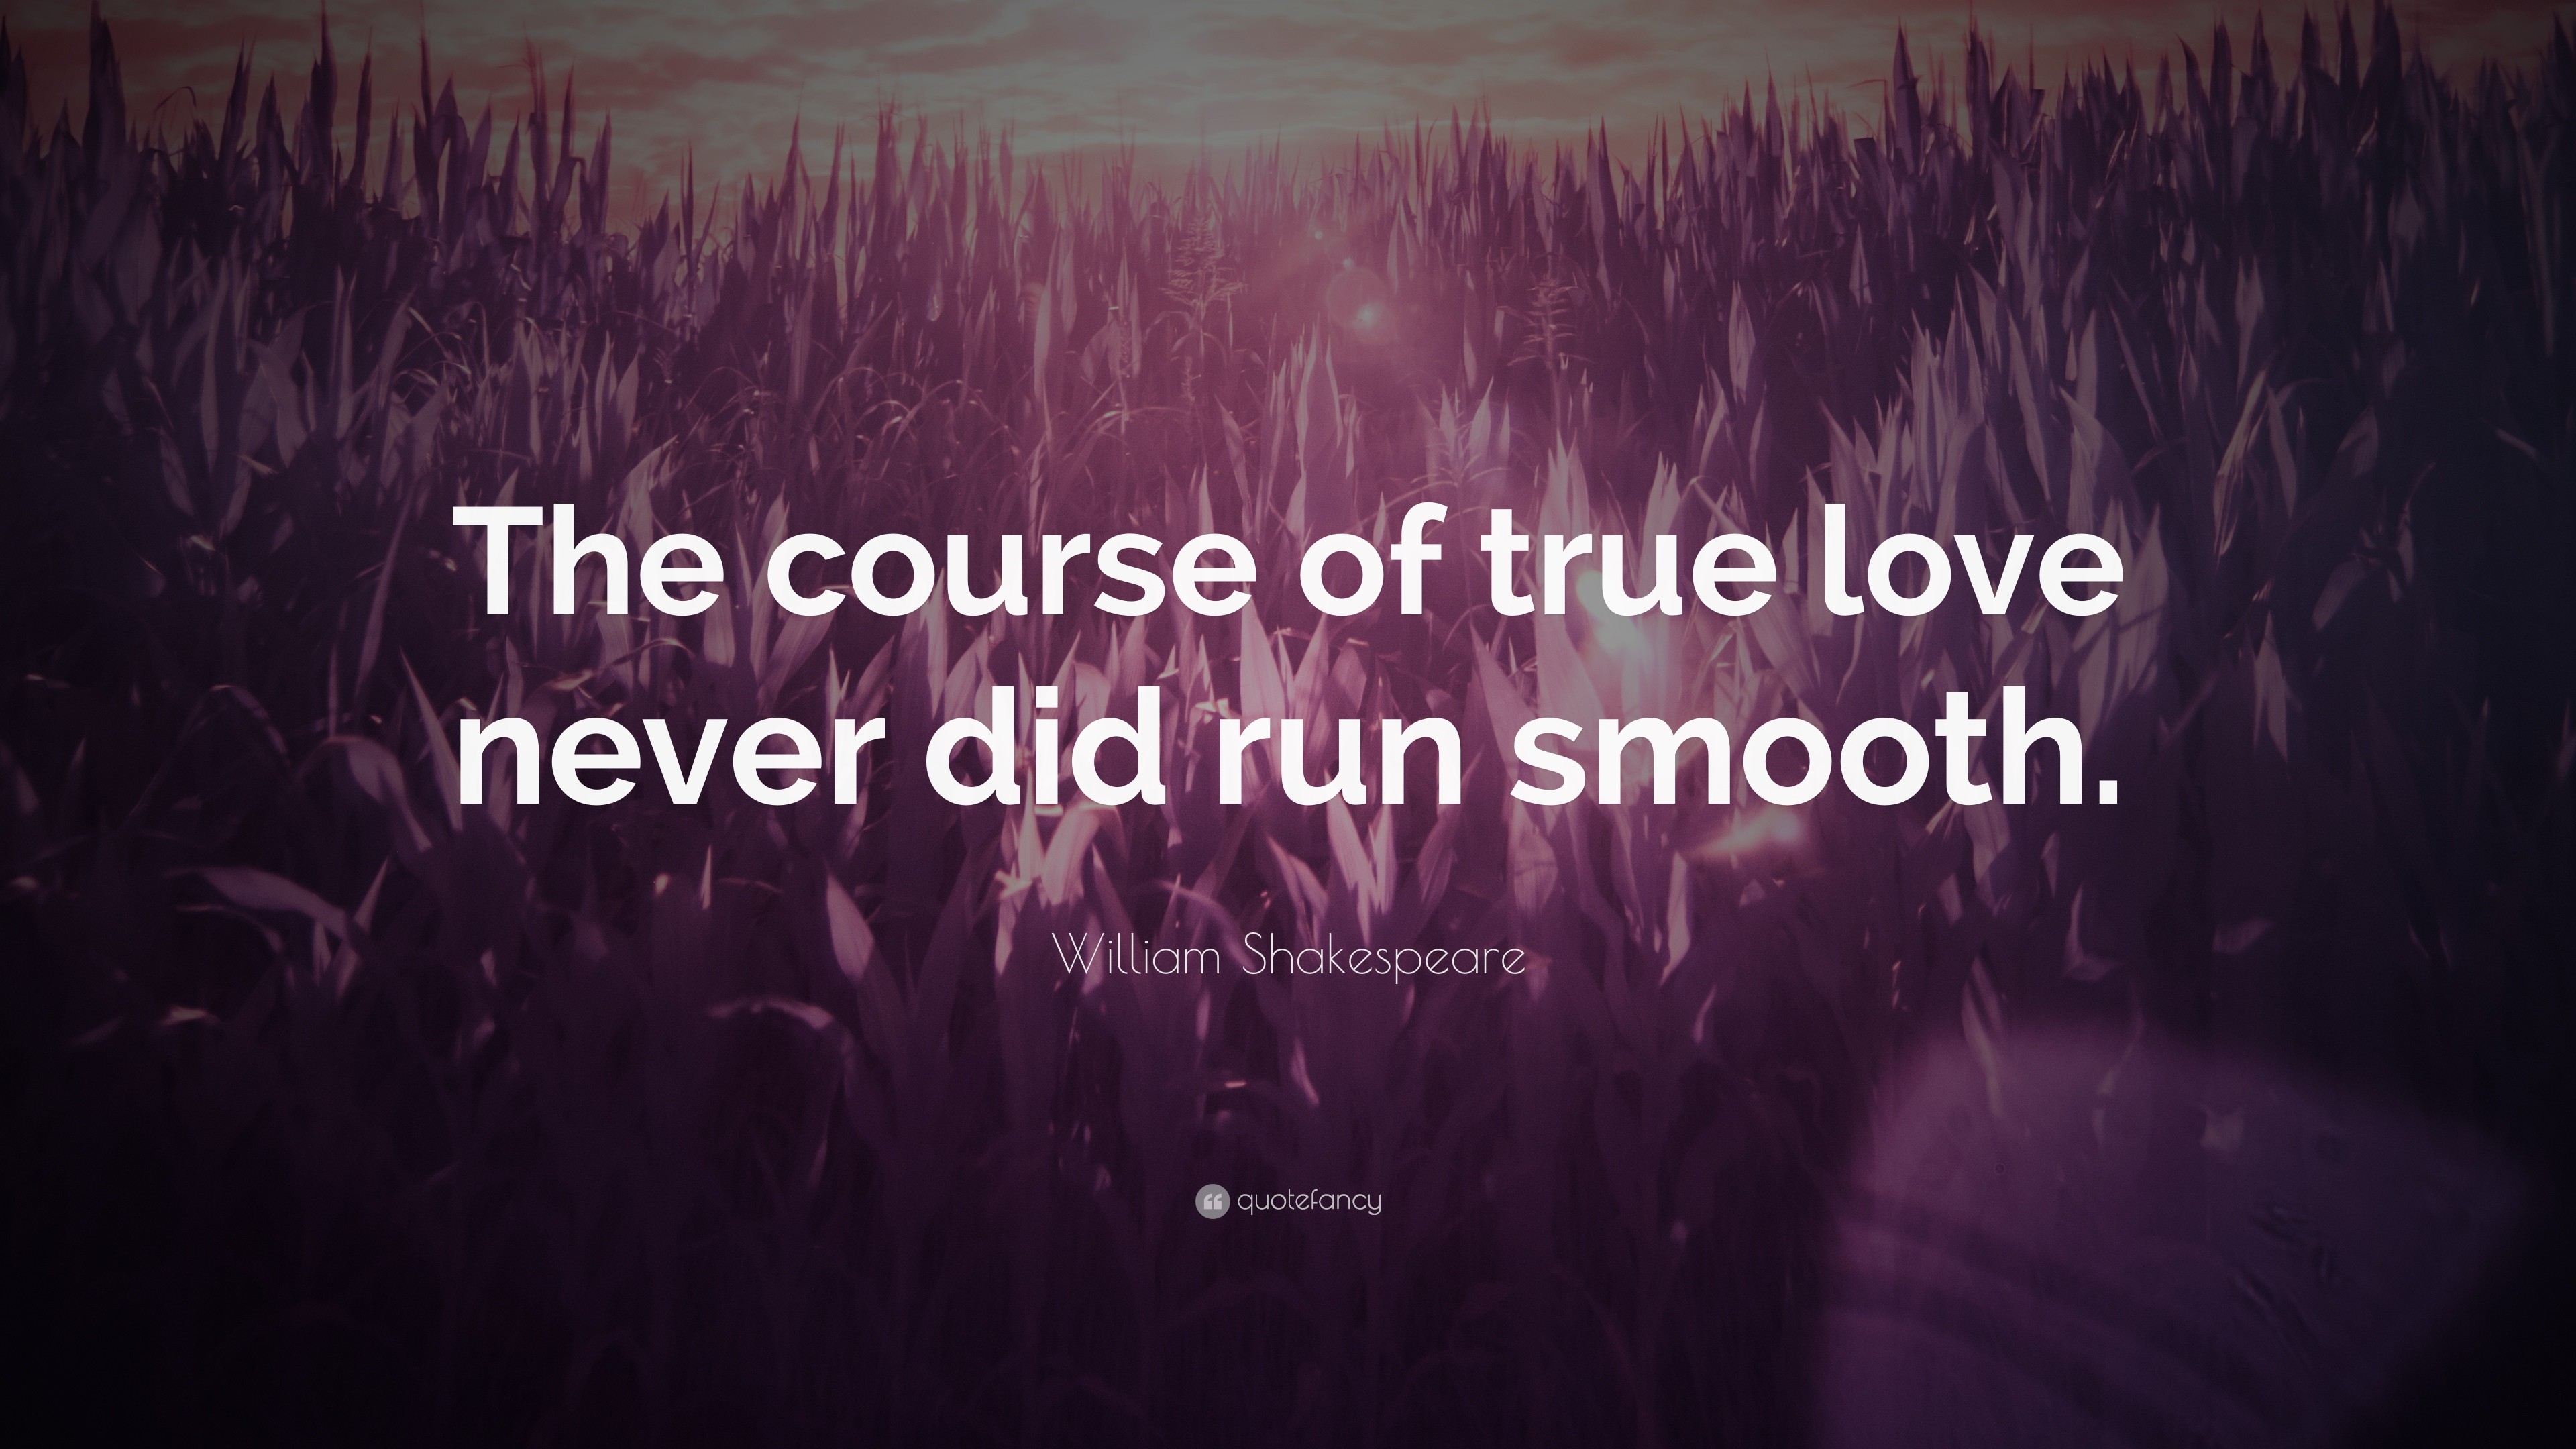 3840x2160 William Shakespeare Quote: “The course of true love never did run smooth.”